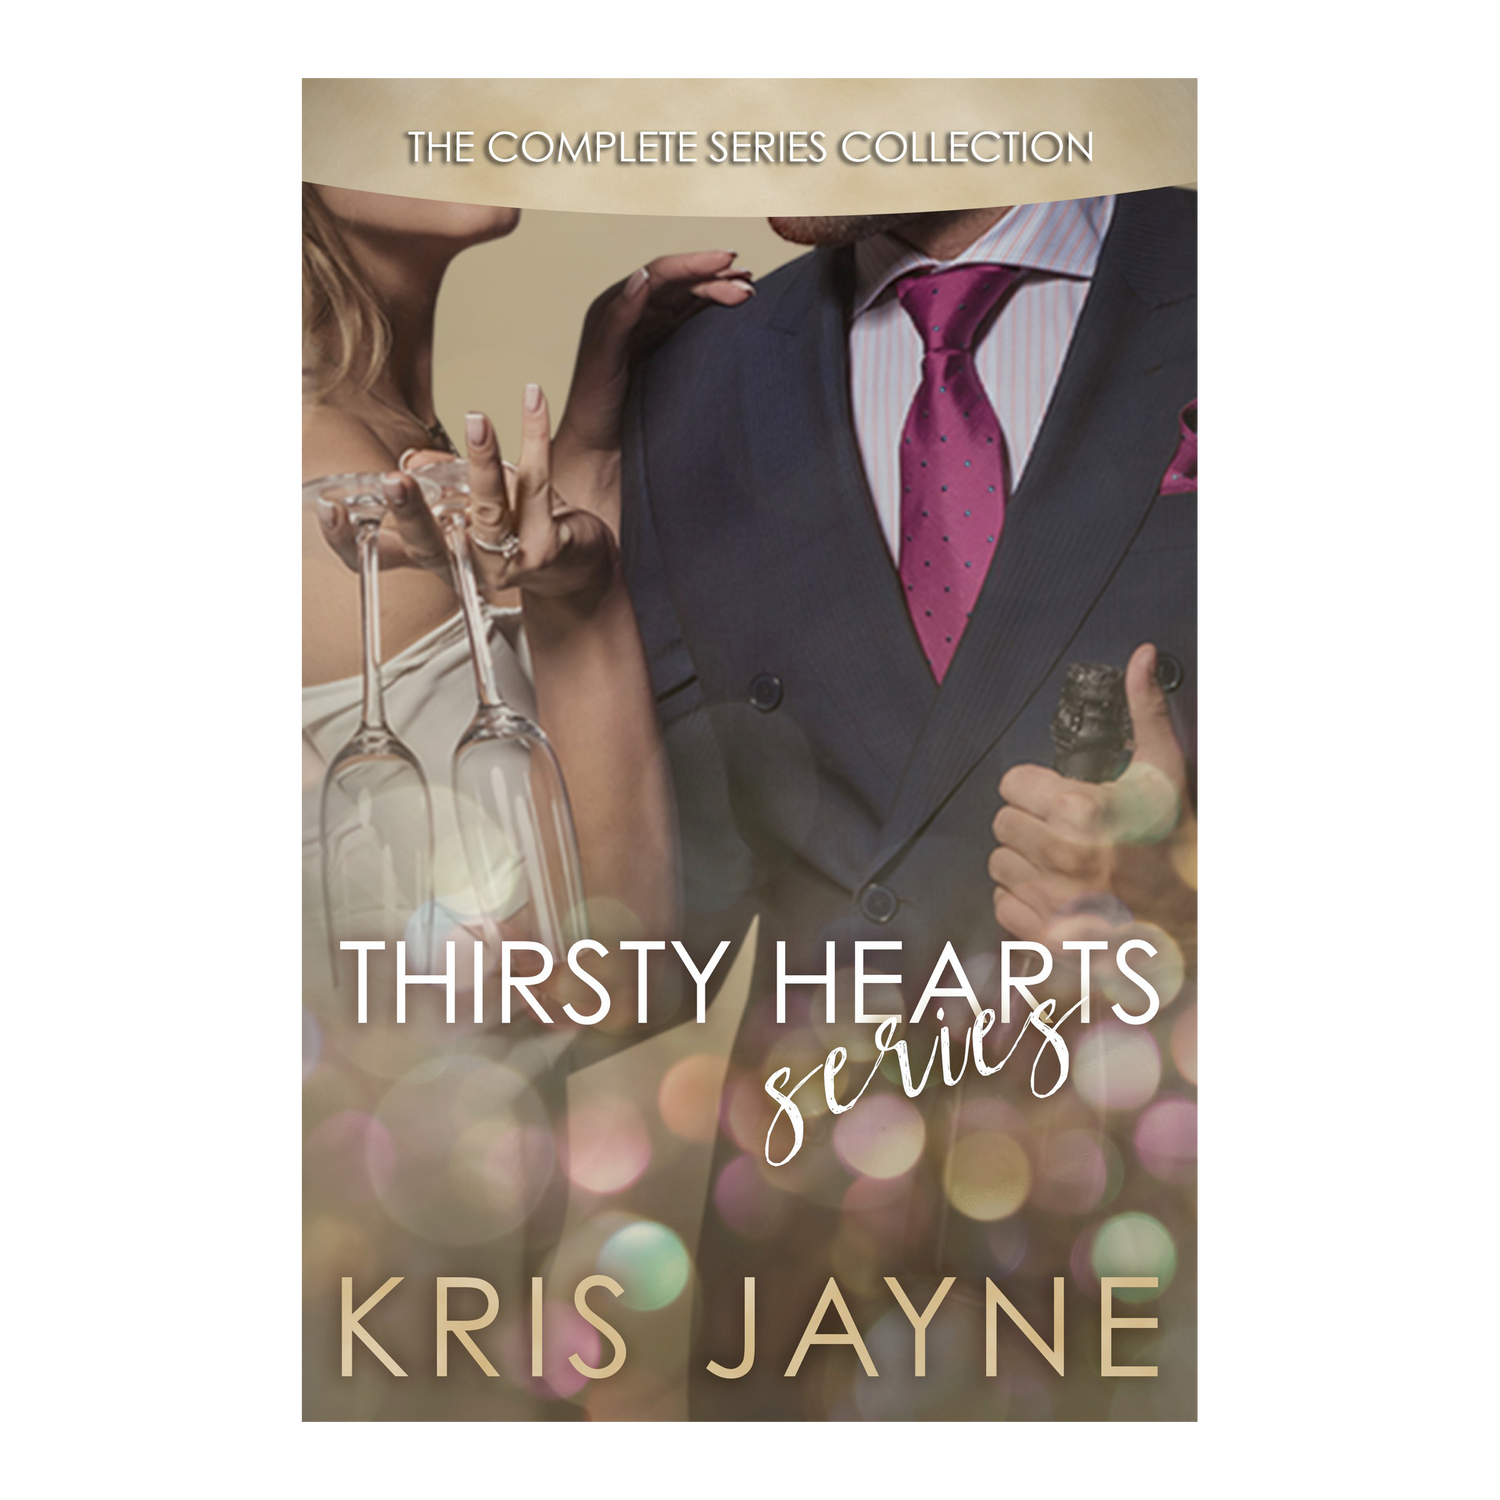 Thirsty Hearts Bundle - The Complete Series